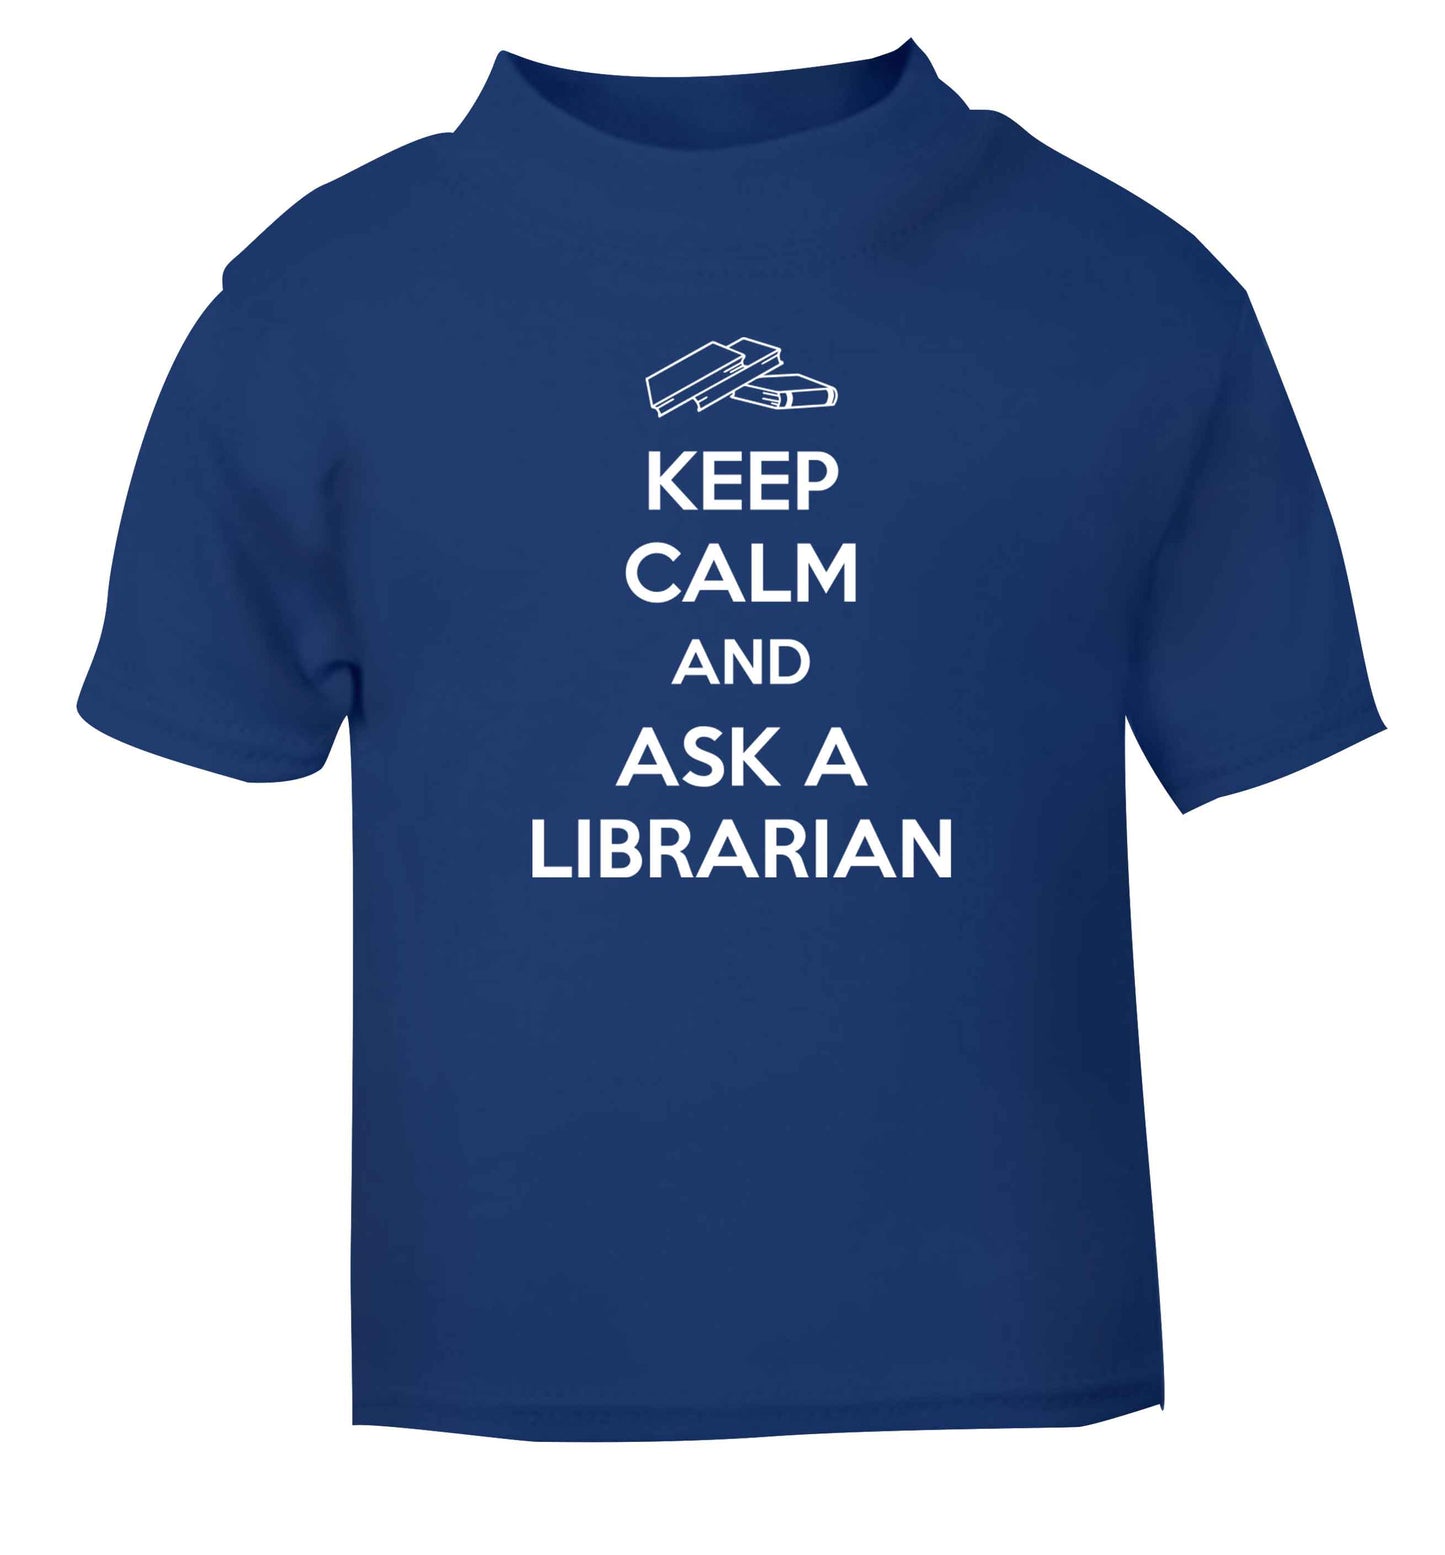 Keep calm and ask a librarian blue Baby Toddler Tshirt 2 Years